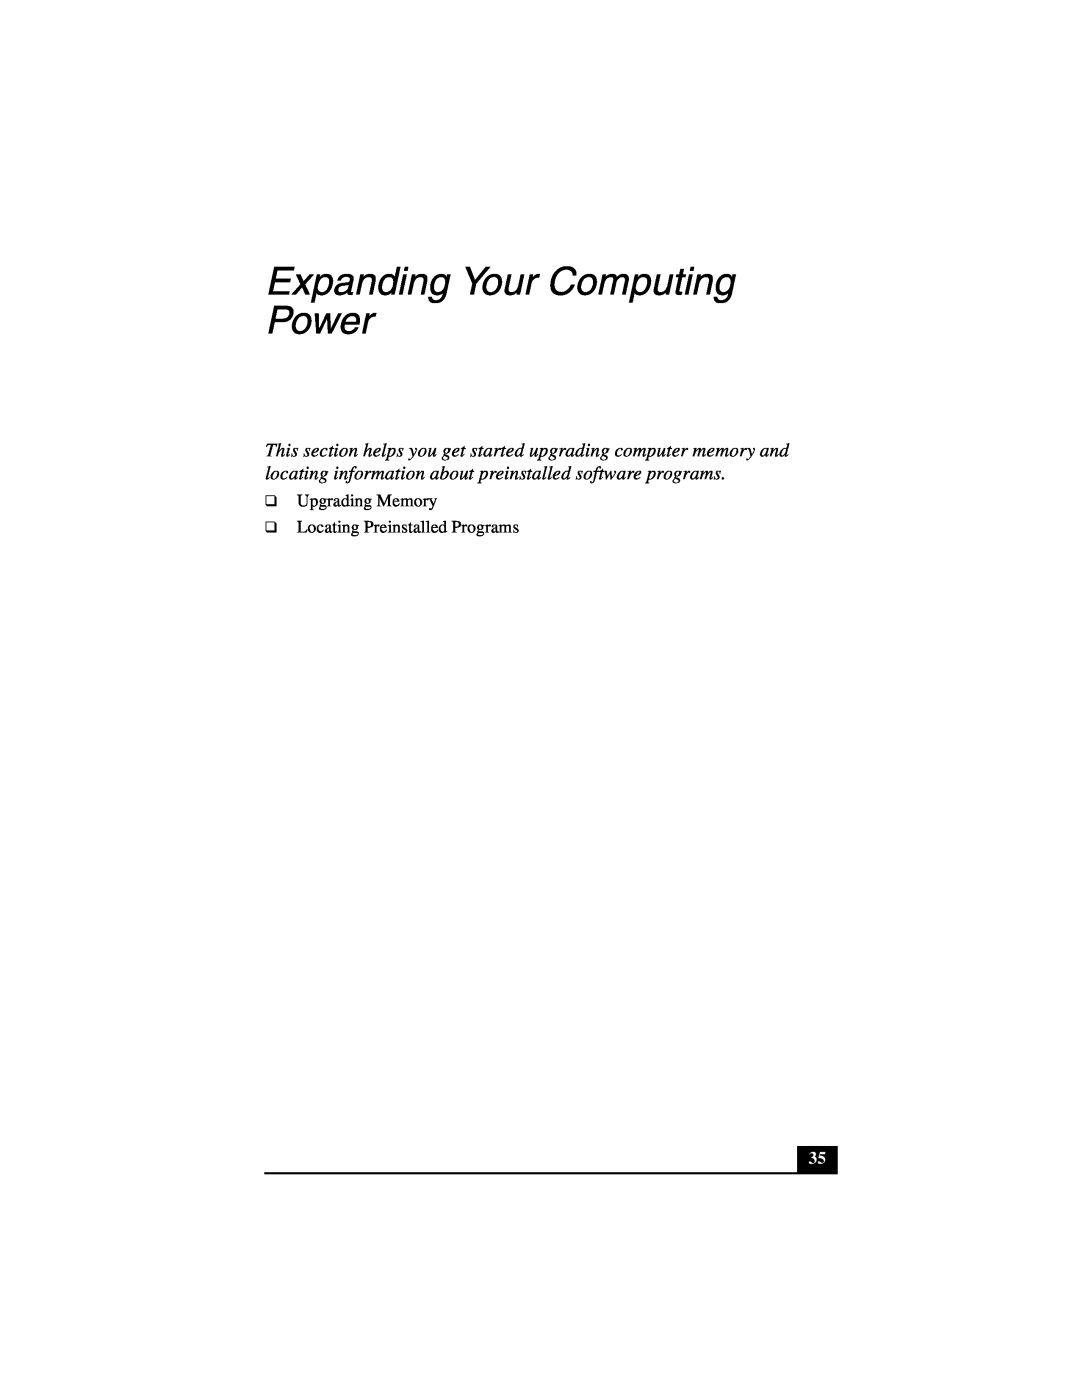 Sony PCG-NV200 quick start Expanding Your Computing Power, Upgrading Memory Locating Preinstalled Programs 